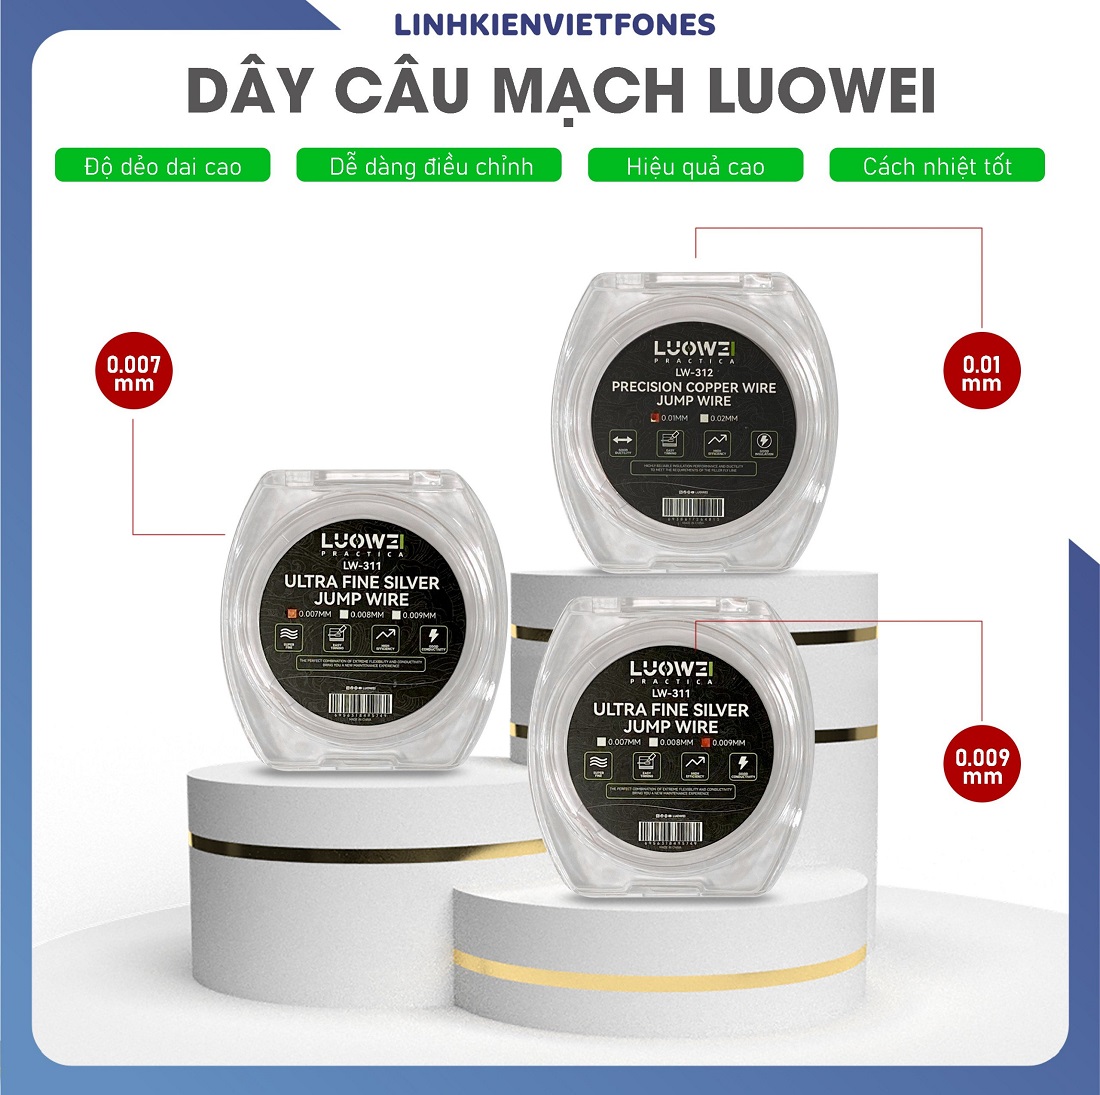 day dong cau day lw 1